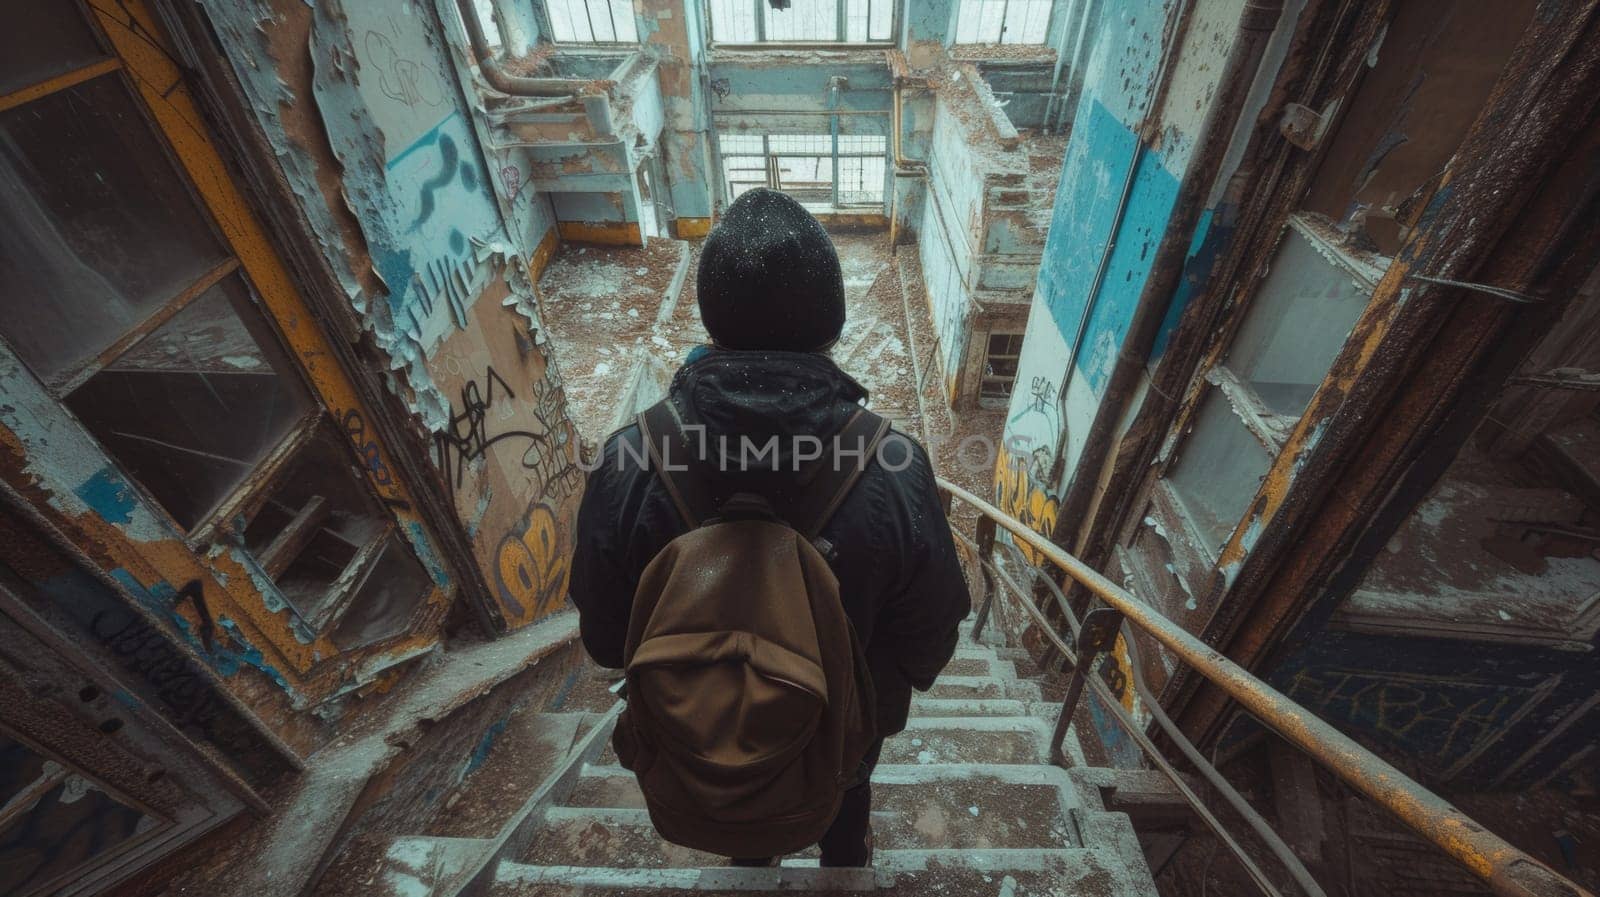 A man with backpack walking down stairs in a building